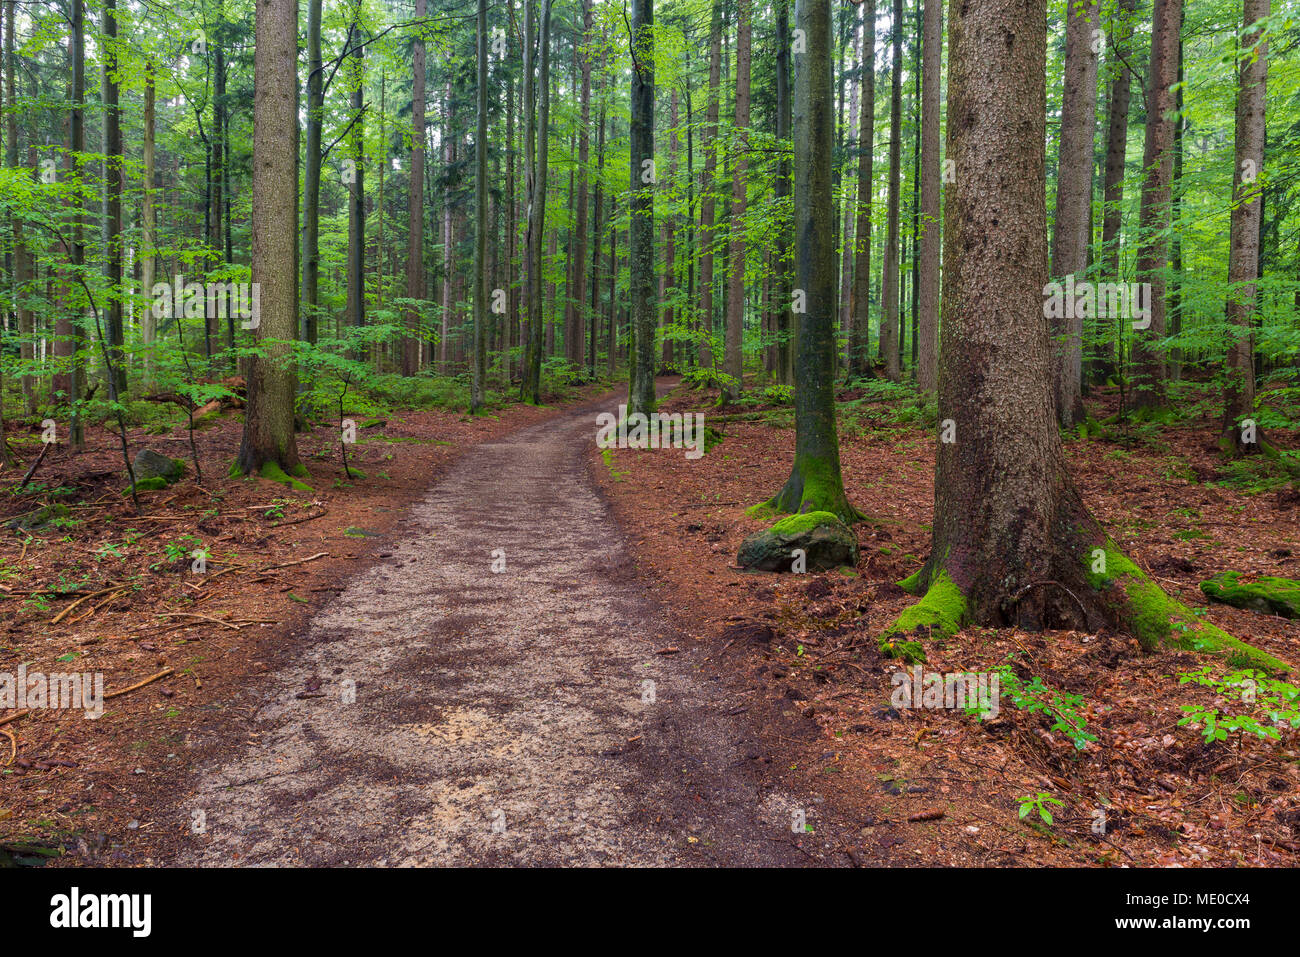 Trail through forest after rain at Spiegelau in the Bavarian Forest National Park in Bavaria, Germany Stock Photo